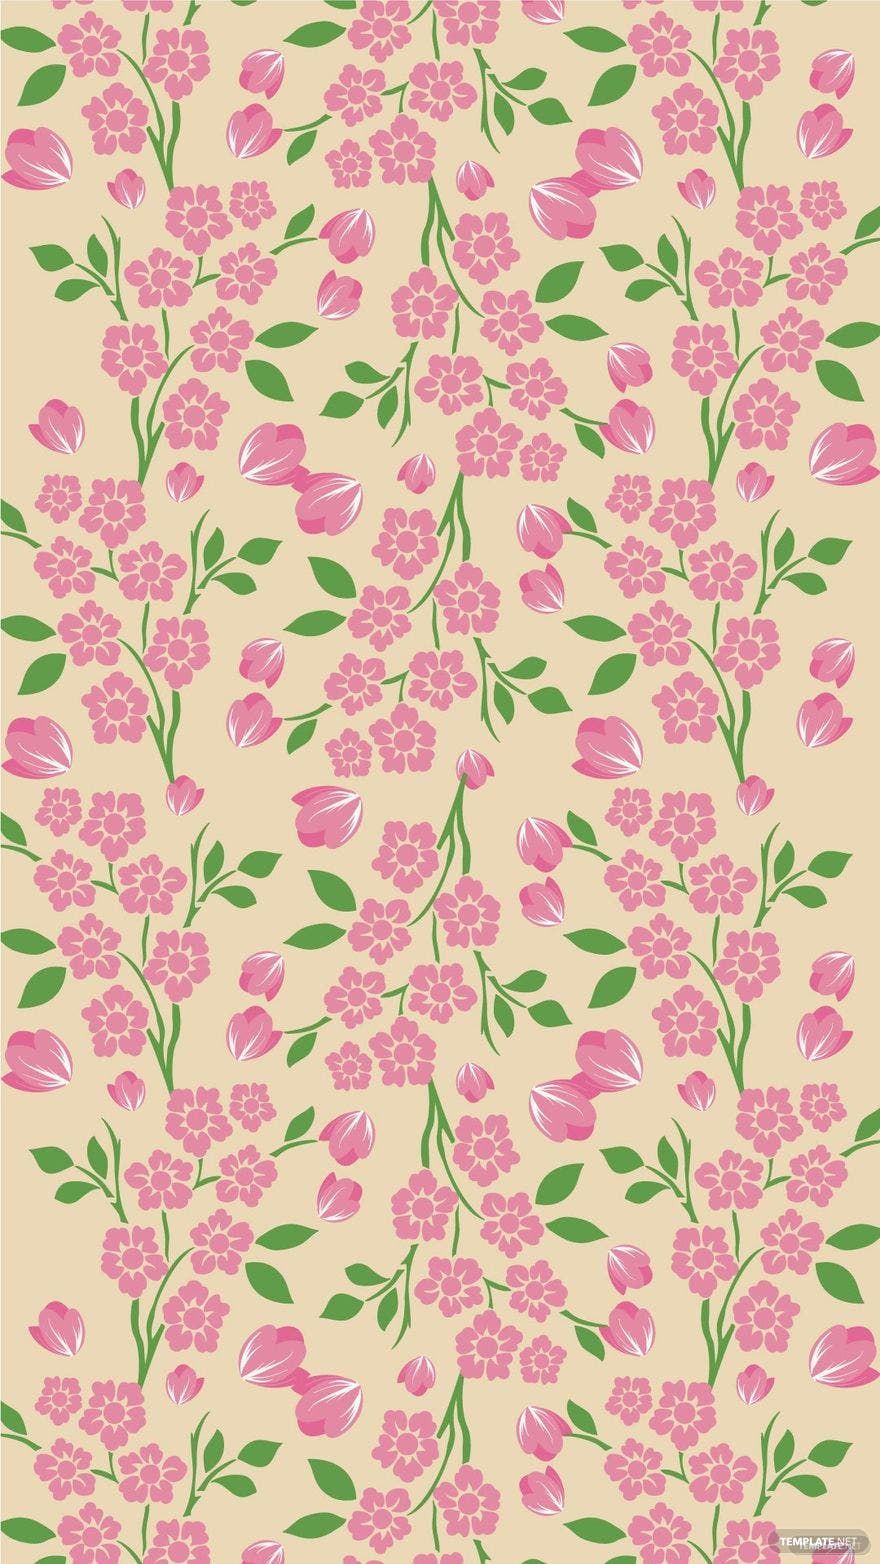 Free Pink Floral Background Vector